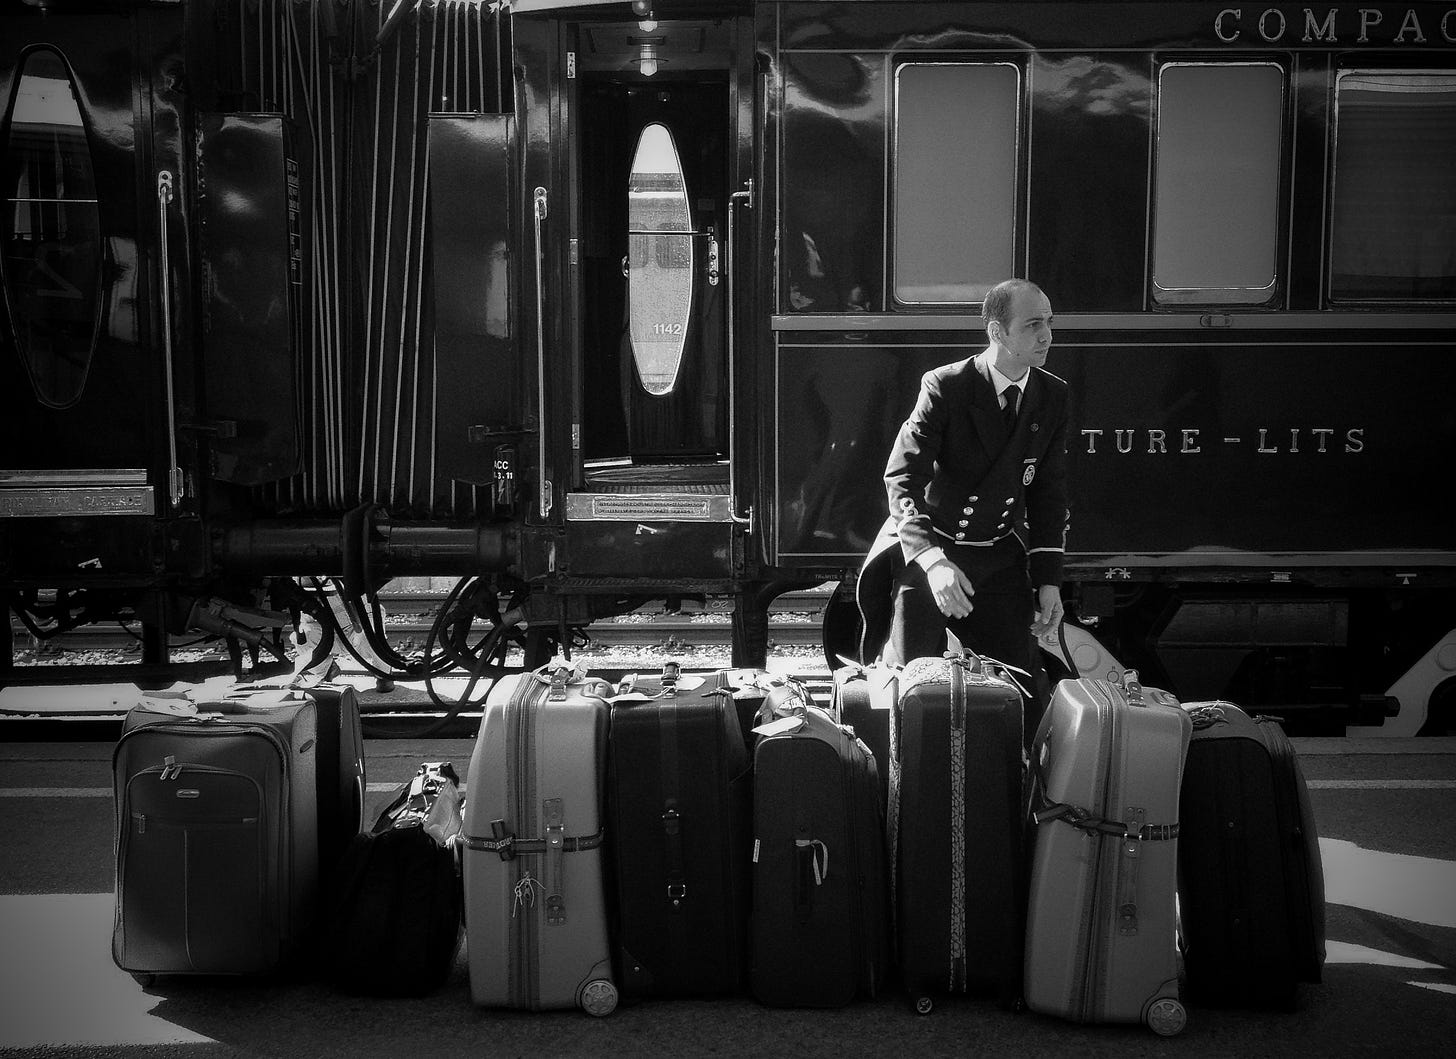 A smartly dressed baggage handler wrangles a row of suitcases stood on the platform next to the stationary carriages of the Orient Express.